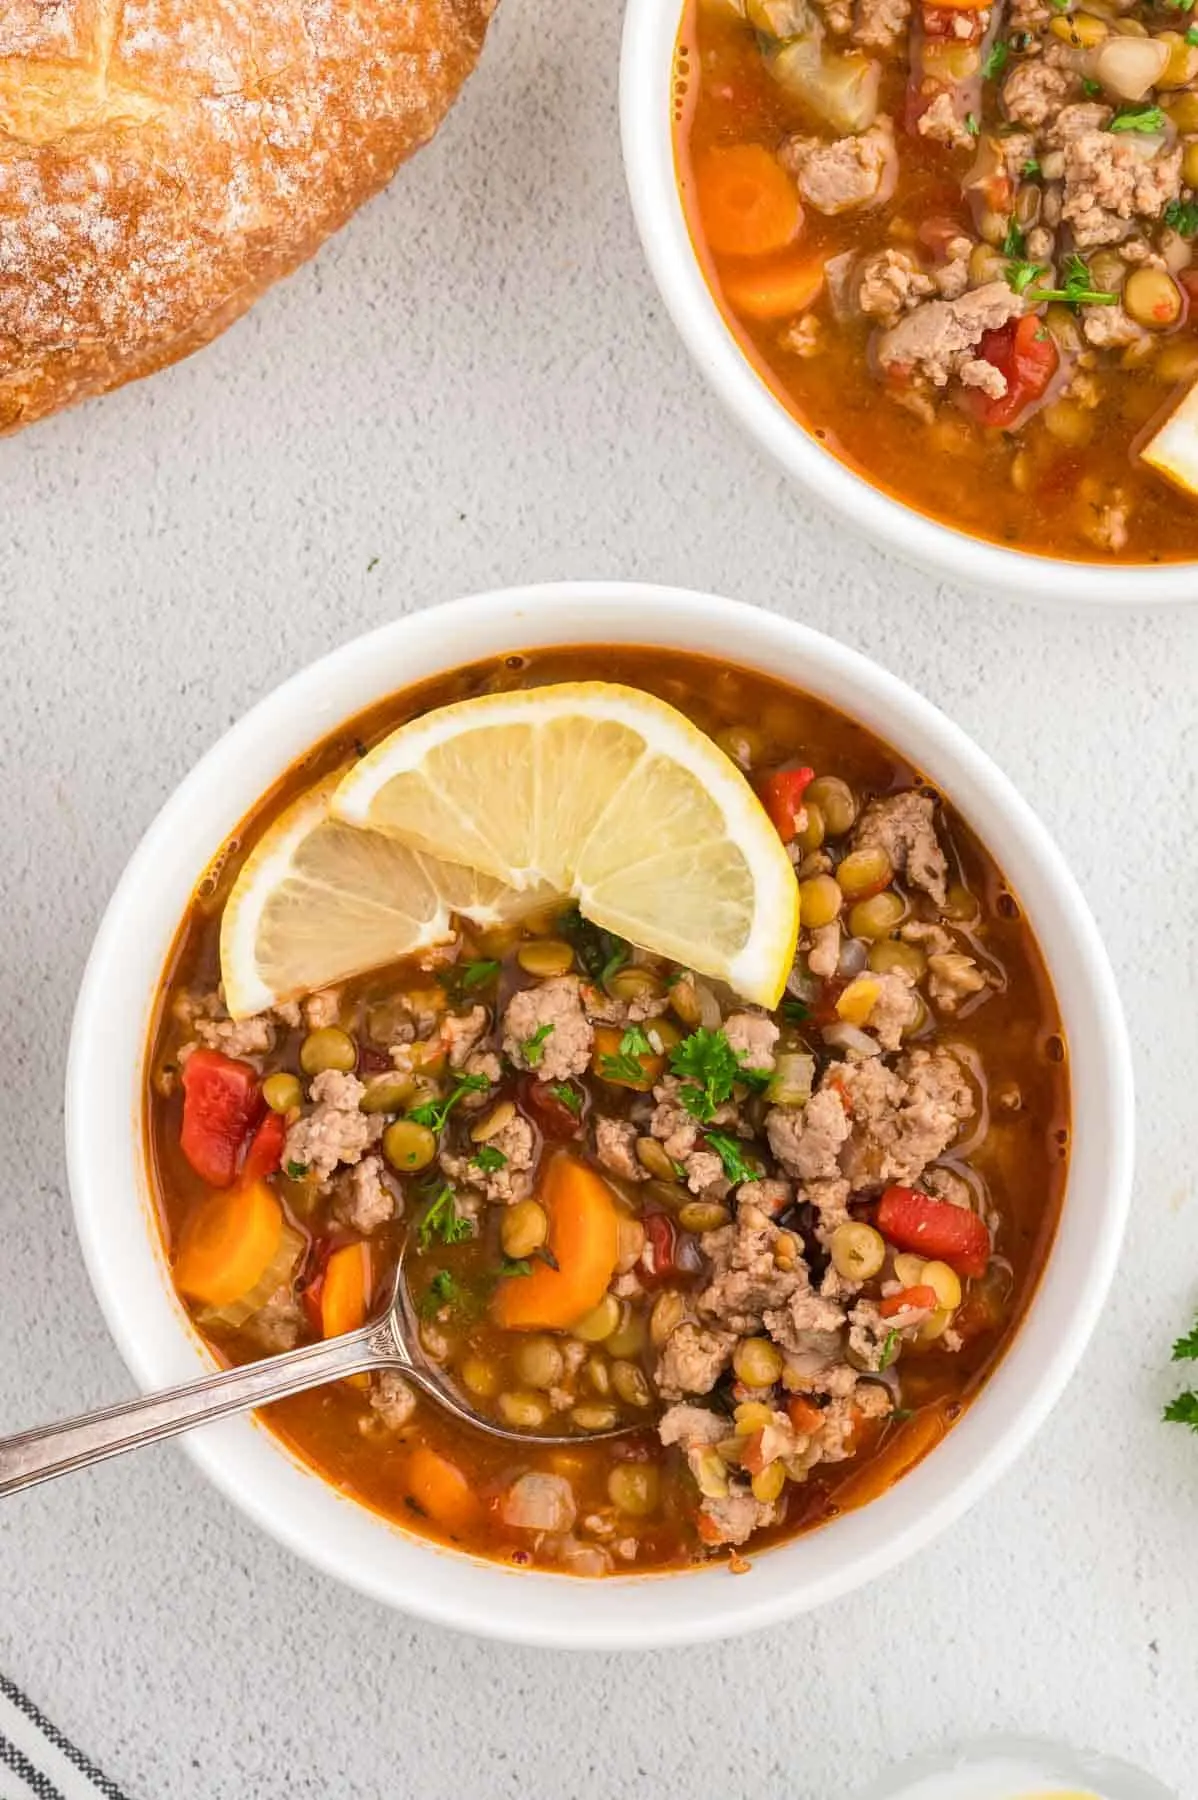 Turkey Lentil Soup is a hearty soup loaded with ground turkey, brown lentils, celery, carrots, onion and diced tomatoes.